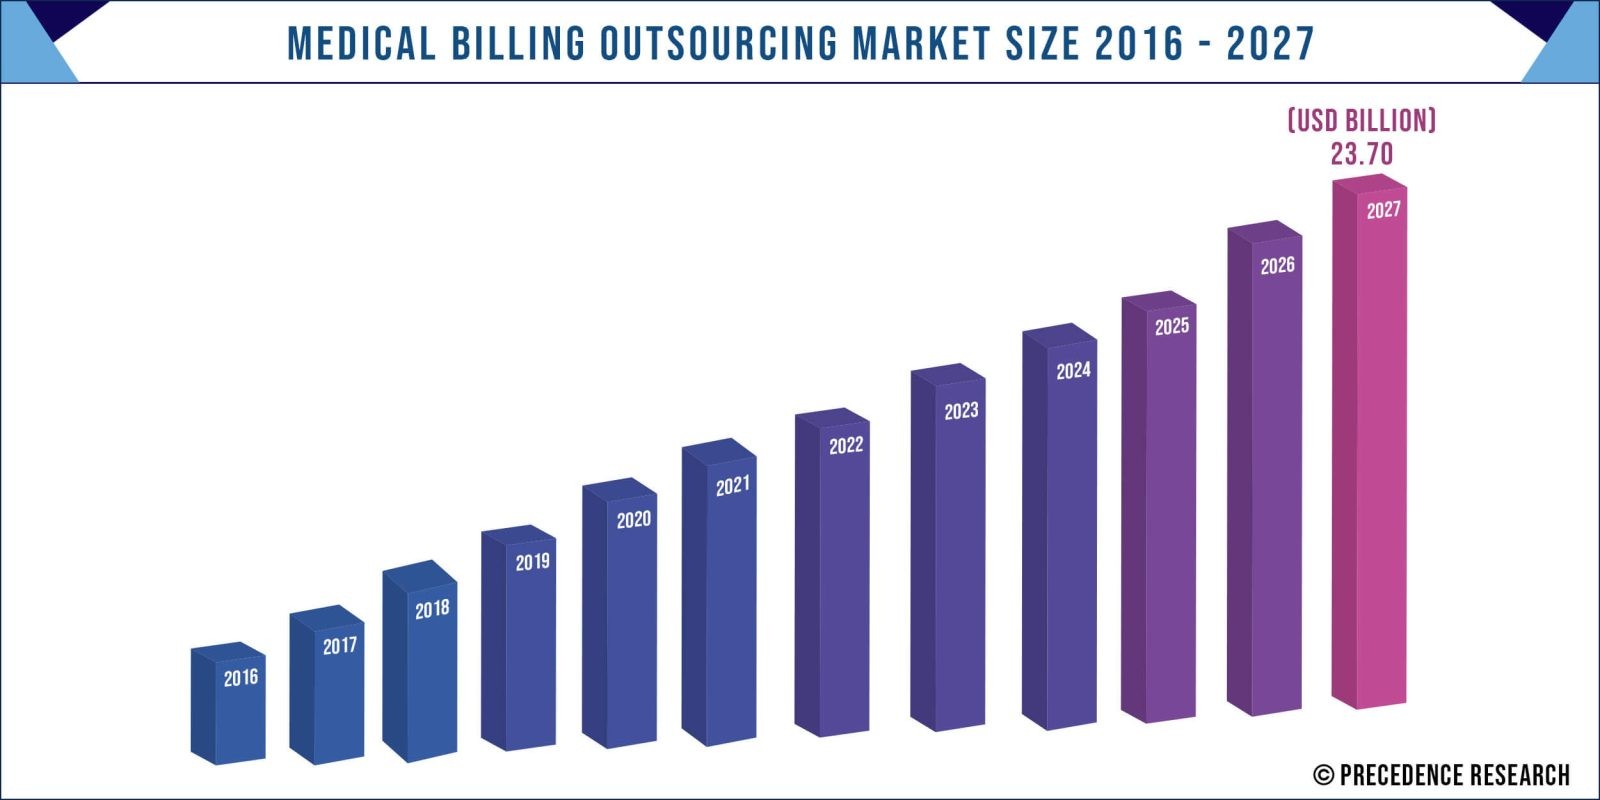 Analysis of the growth of the medical billing software market from 2021-2028